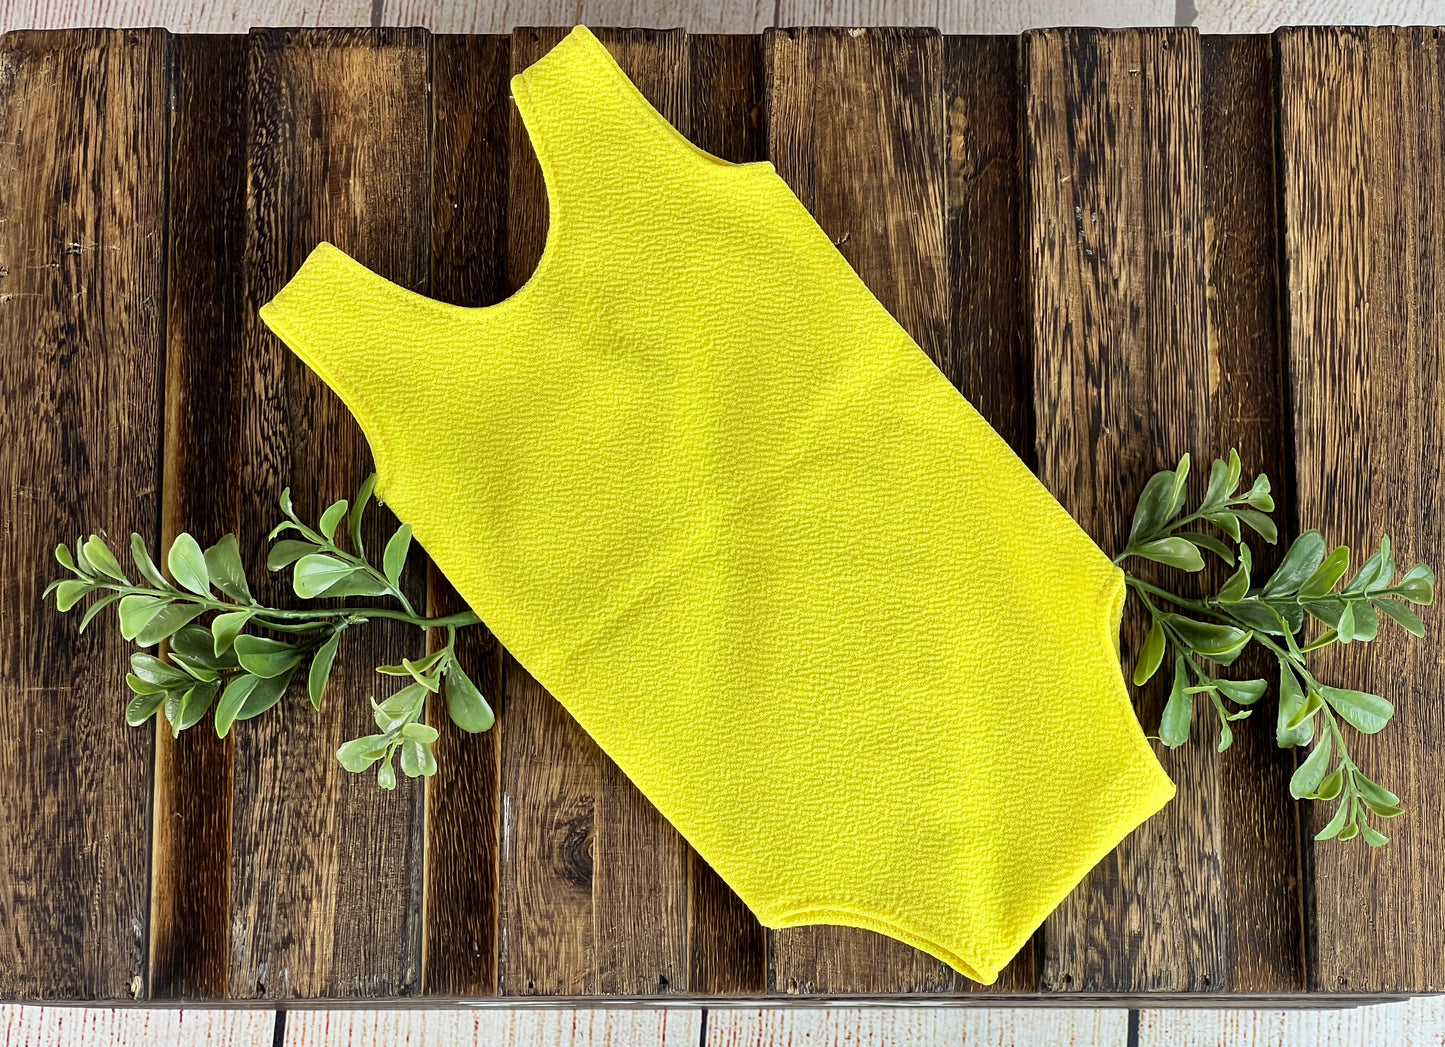 Sleeveless Stitch Romper- Textured - Yellow (AS IS ITEM)